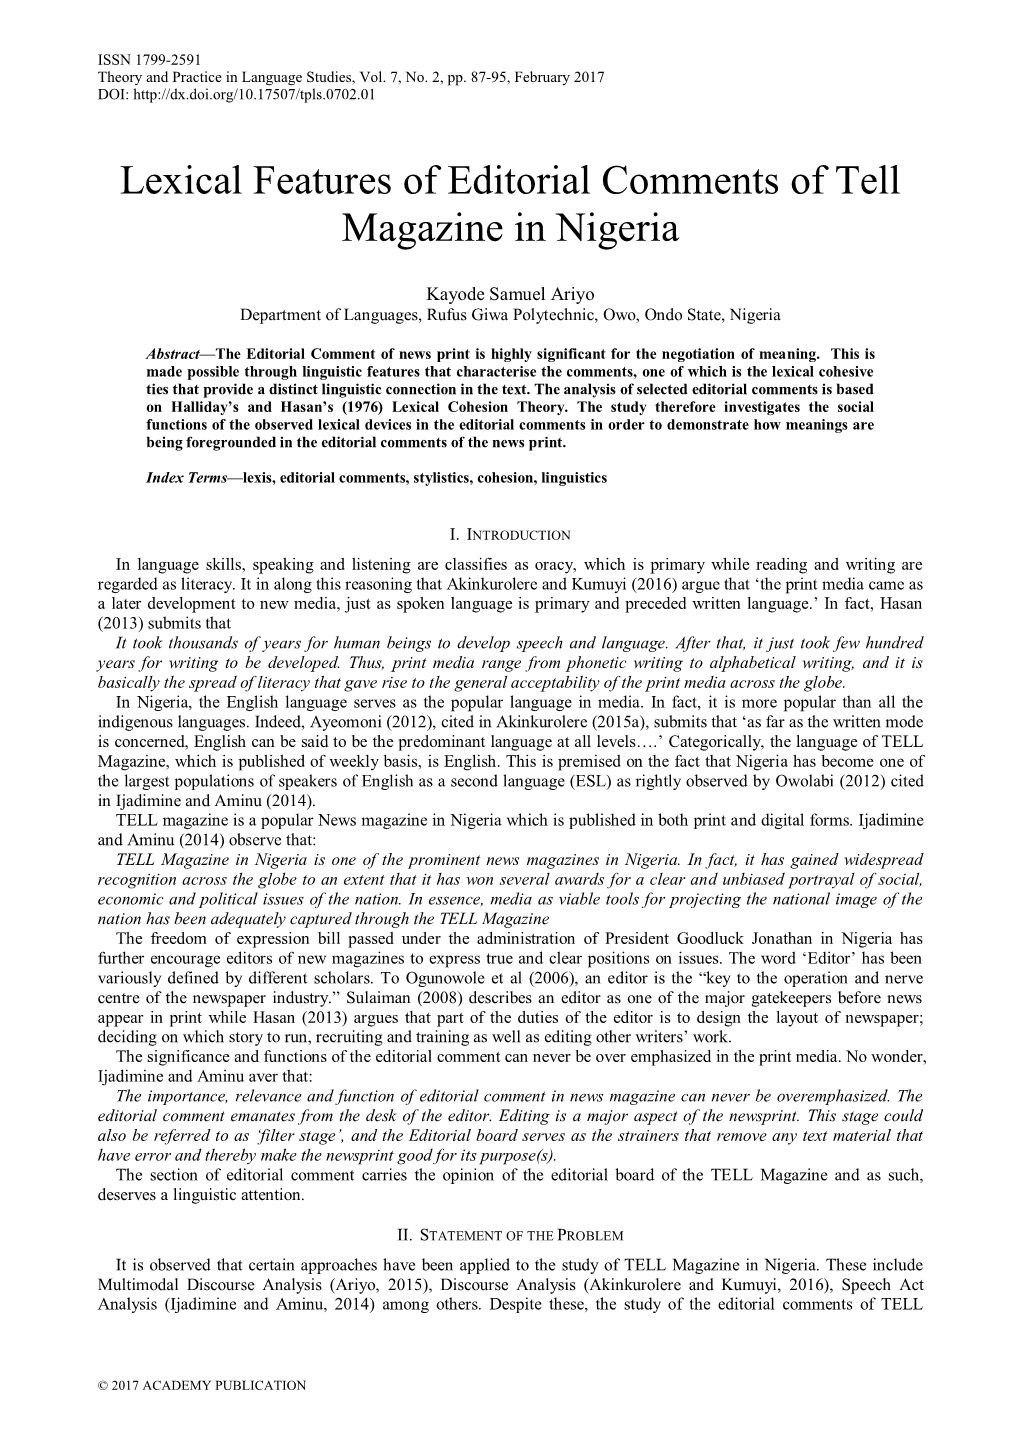 Lexical Features of Editorial Comments of Tell Magazine in Nigeria